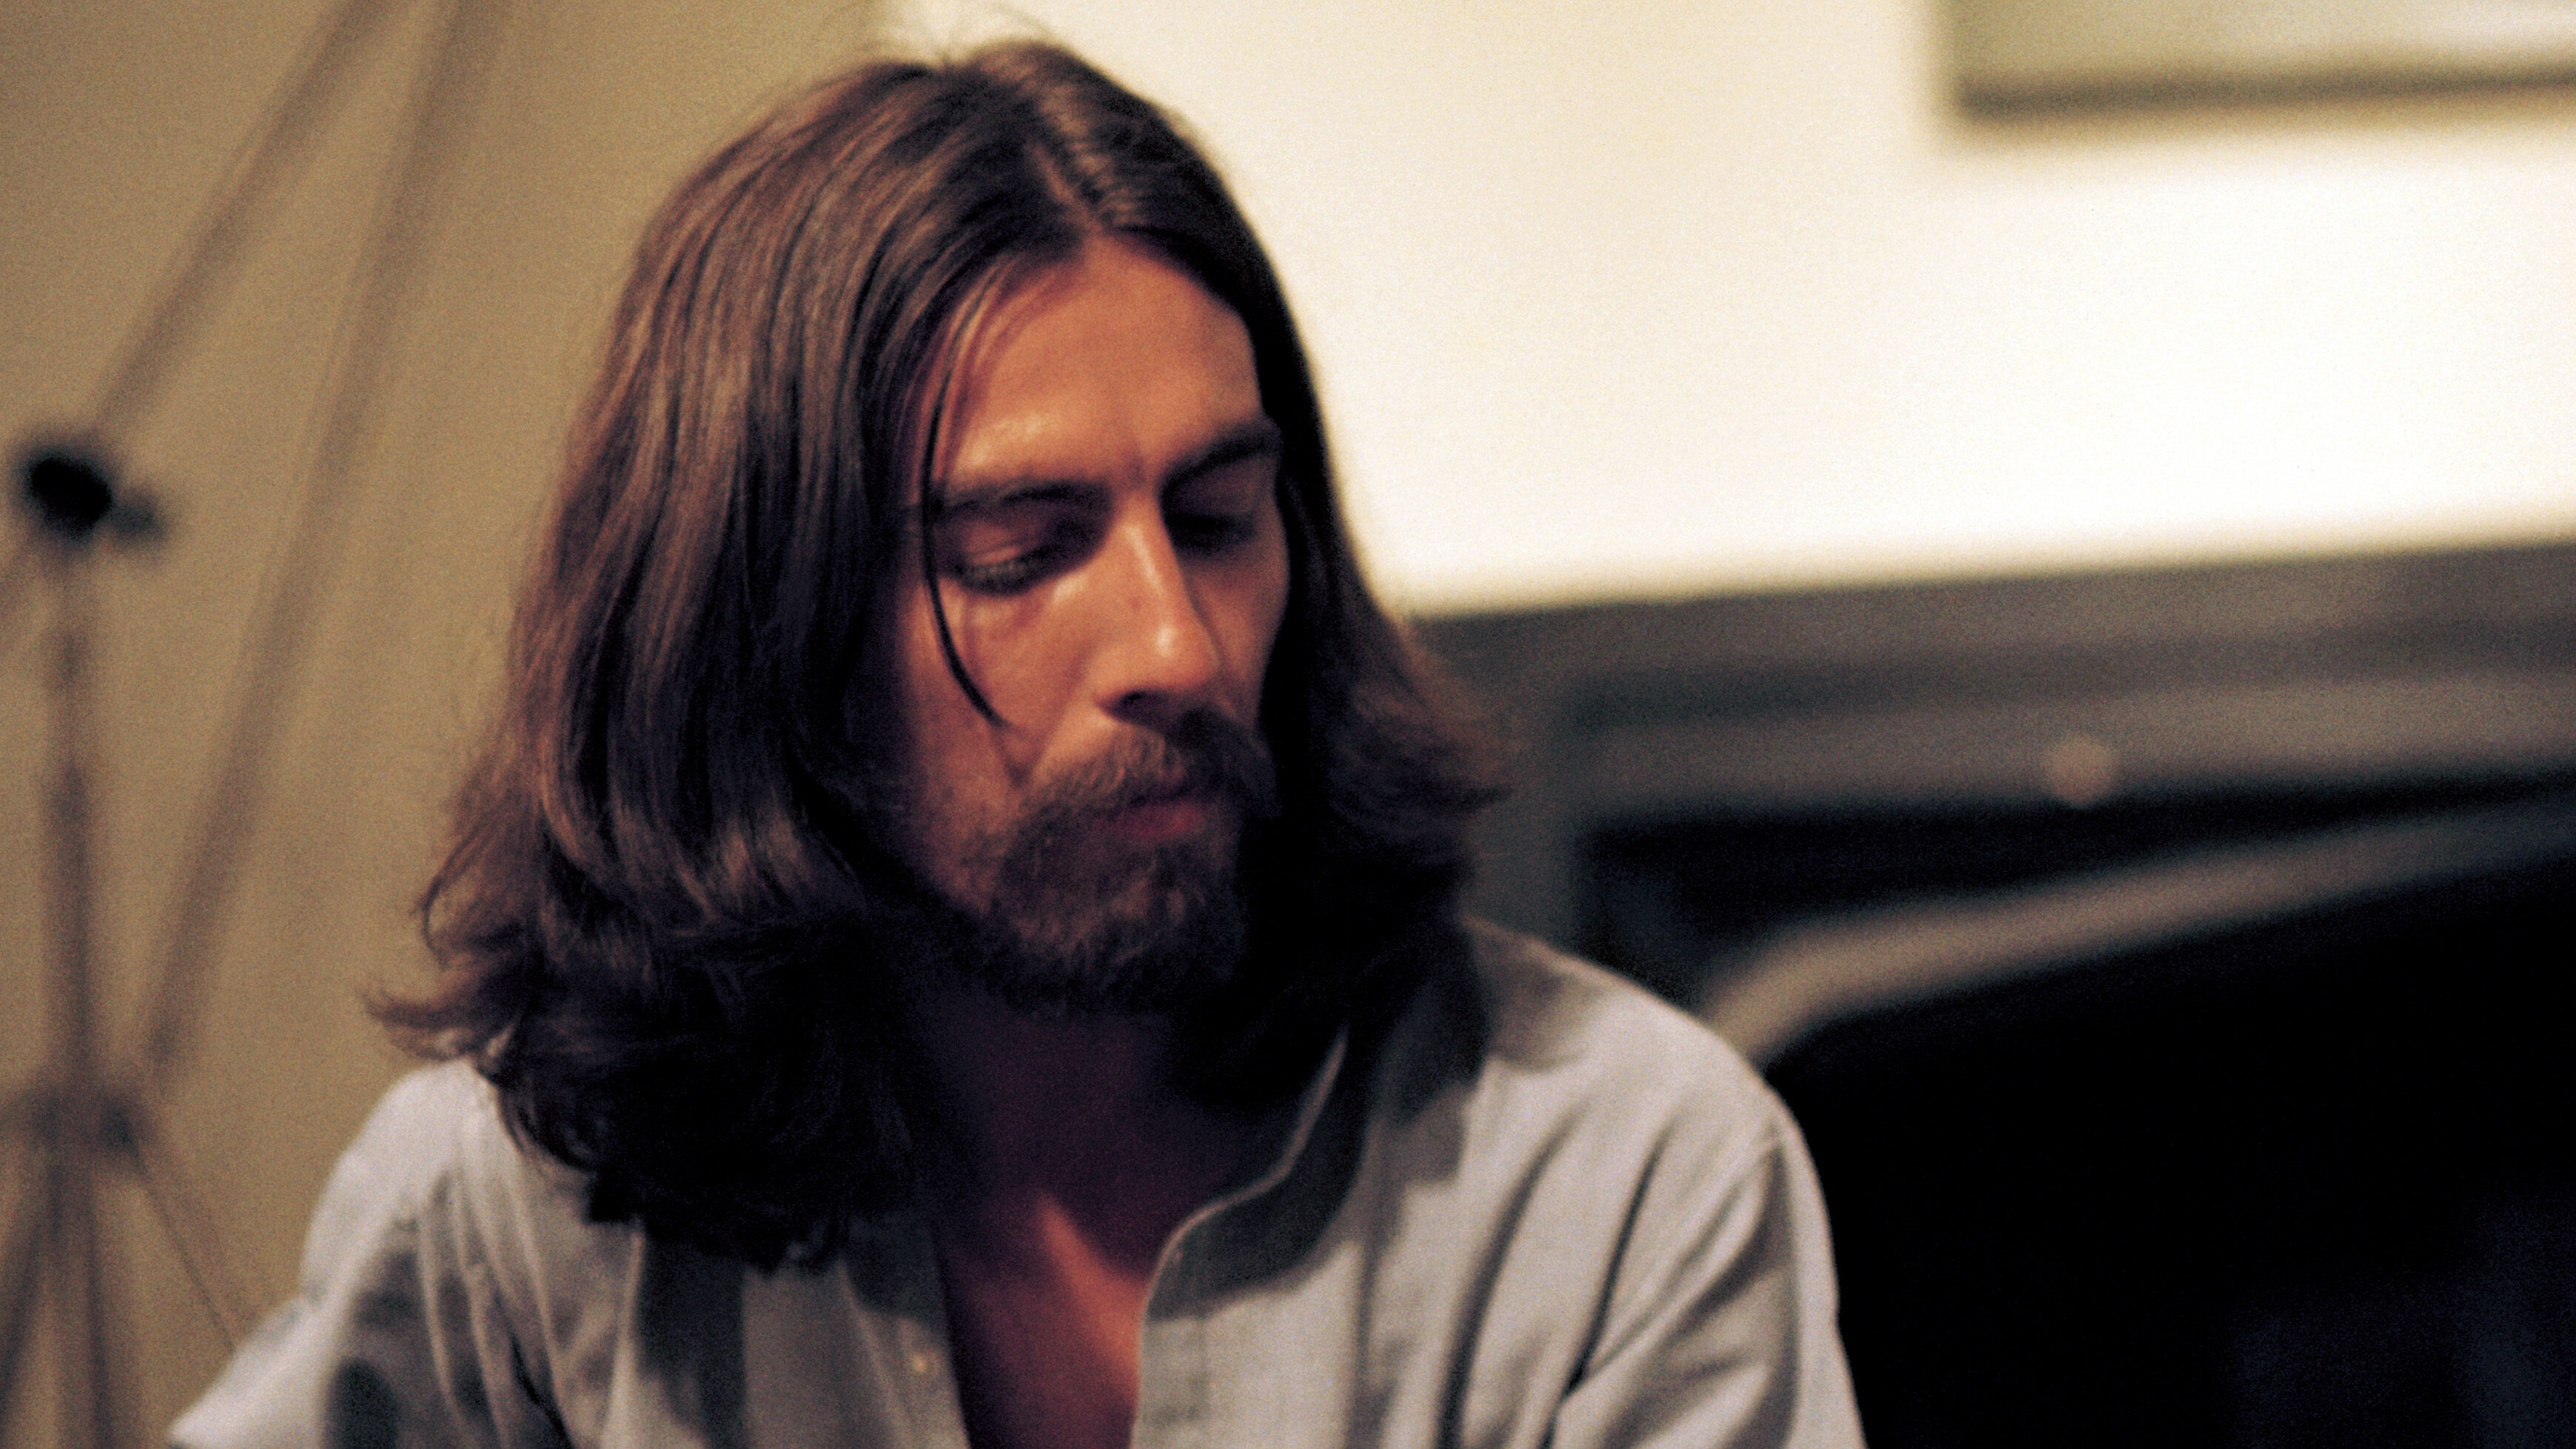 George Harrison’s solo recordings move to Dark Horse Records/BMG, bringing his publishing and recorded music under one roof – Music Business Worldwide